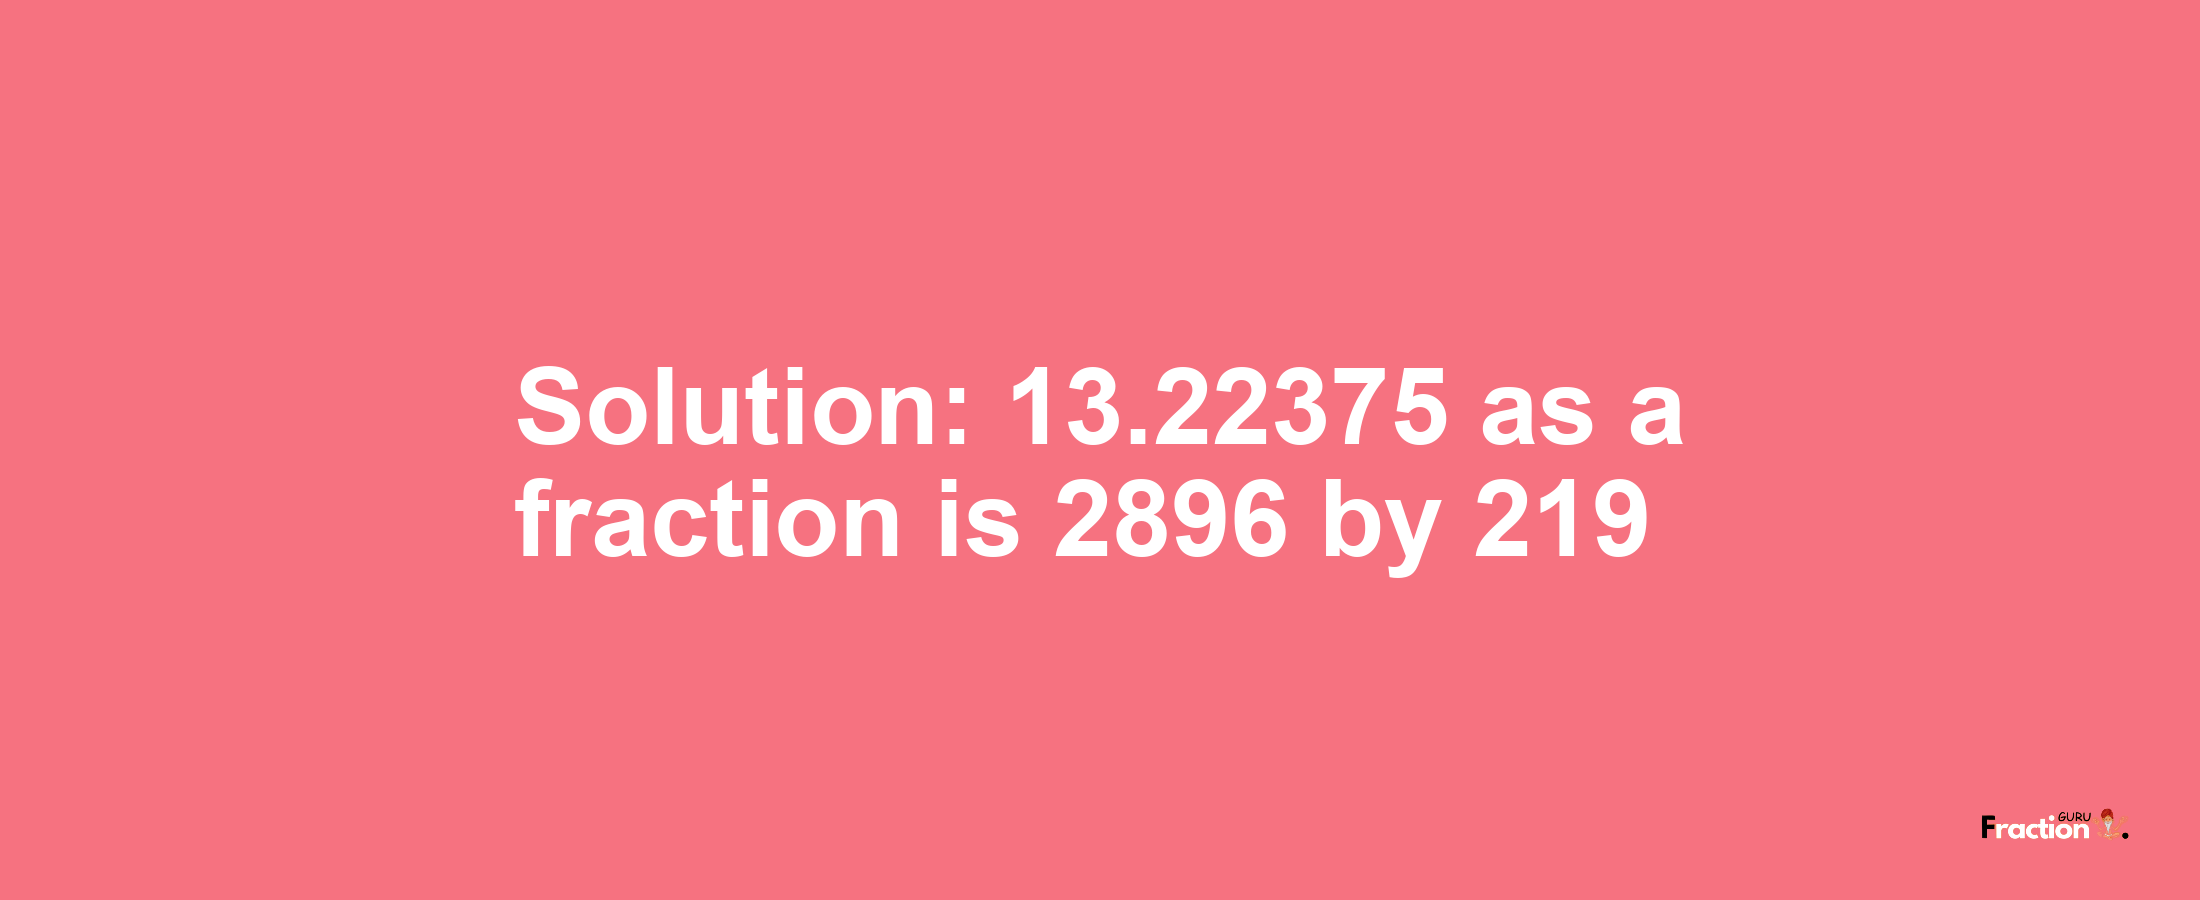 Solution:13.22375 as a fraction is 2896/219